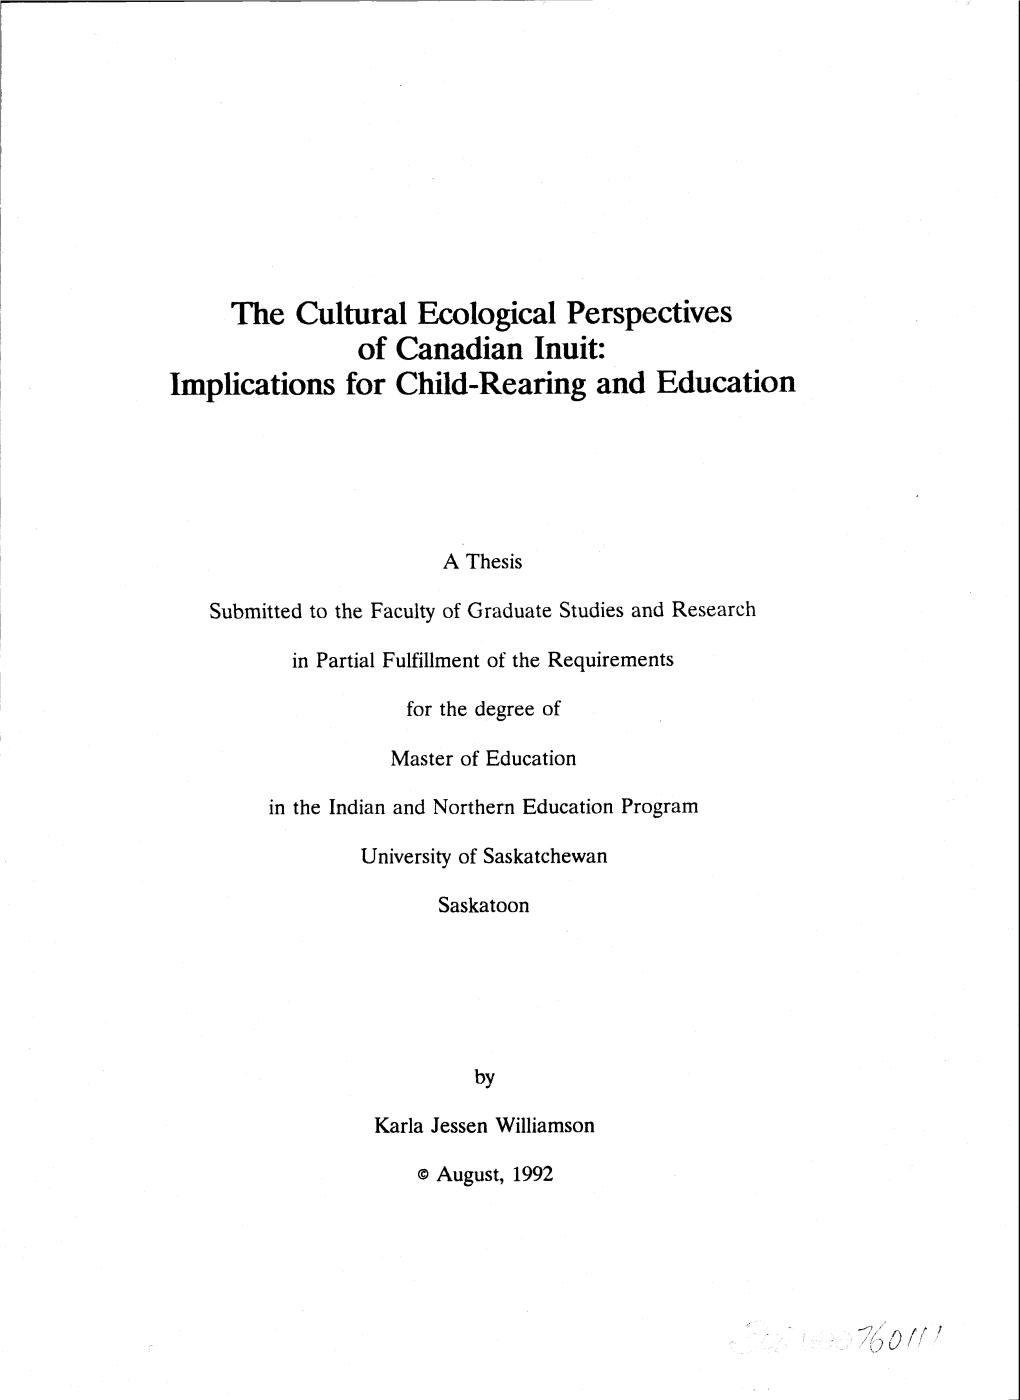 The Cultural Ecological Perspectives of Canadian Inuit: Implications for Child-Rearing and Education